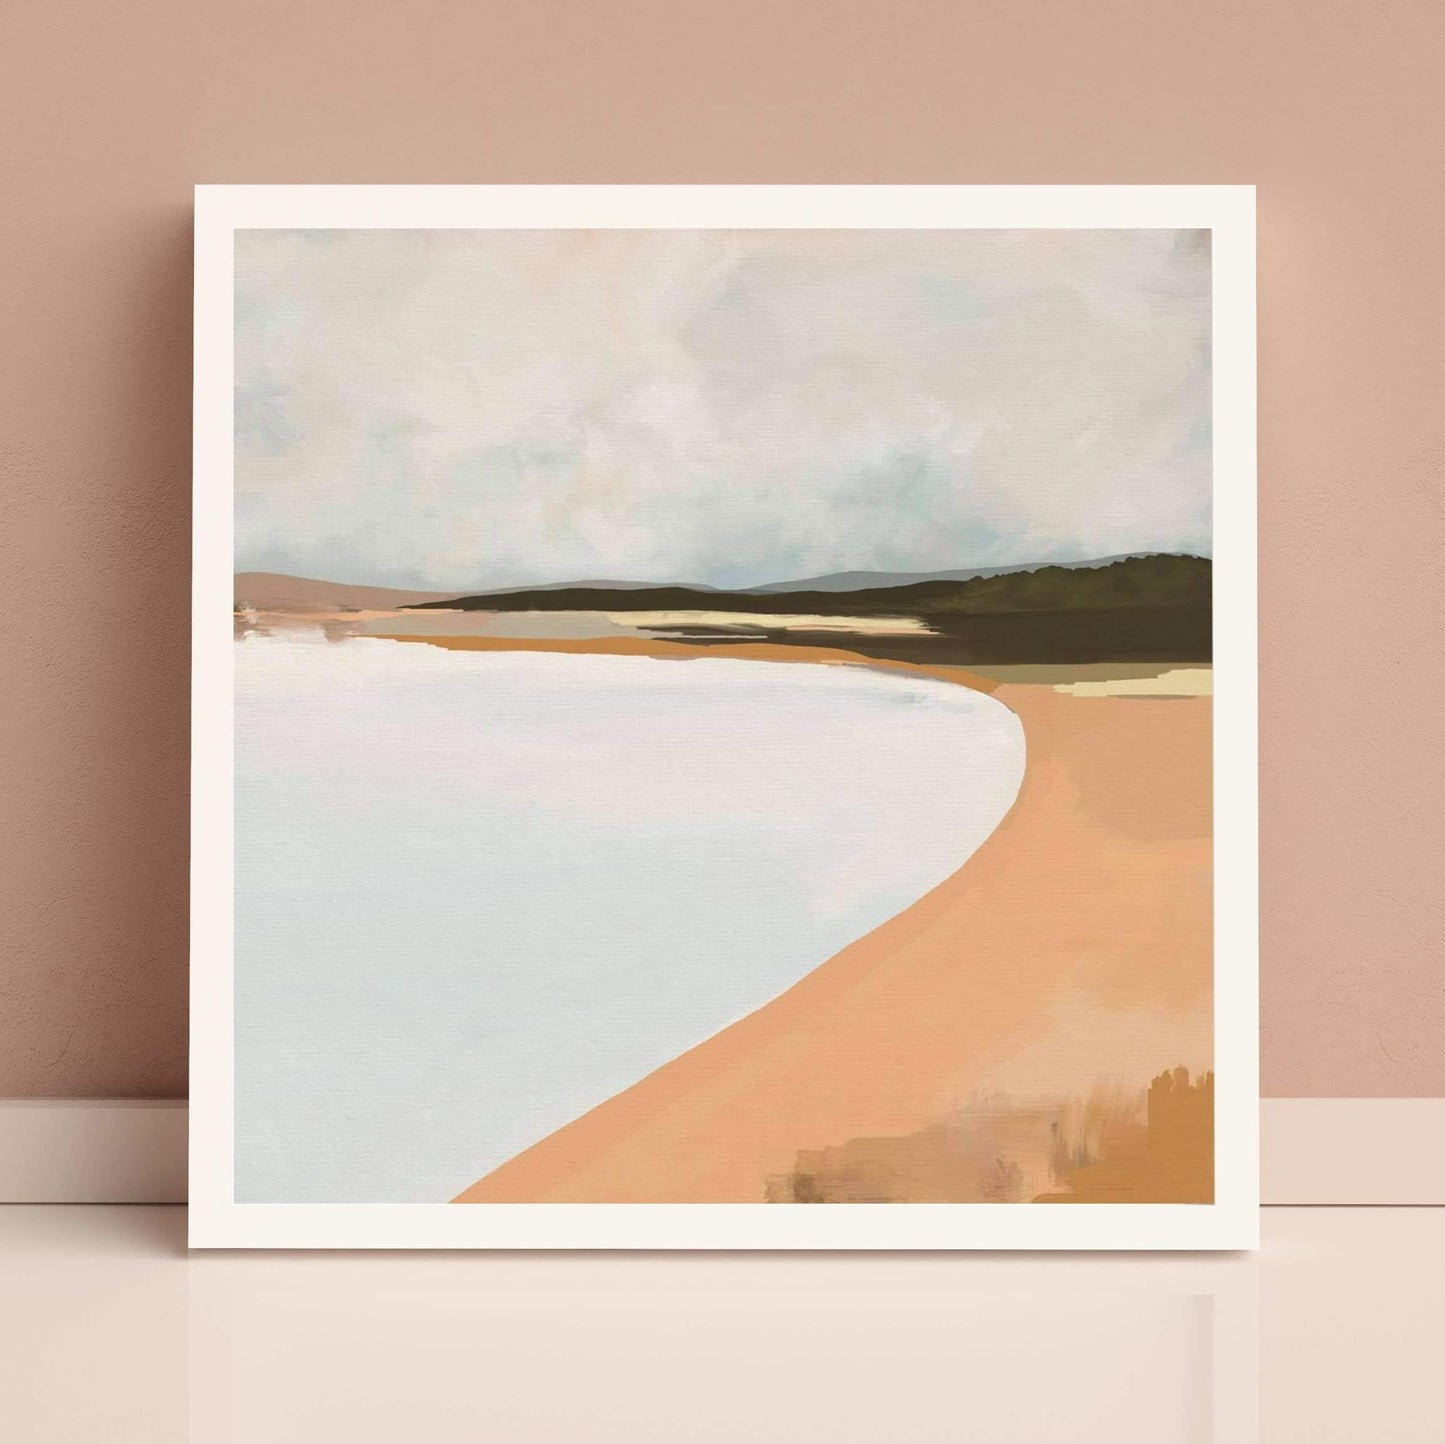 Abstract landscape in shades of light blue, orange, brown and white